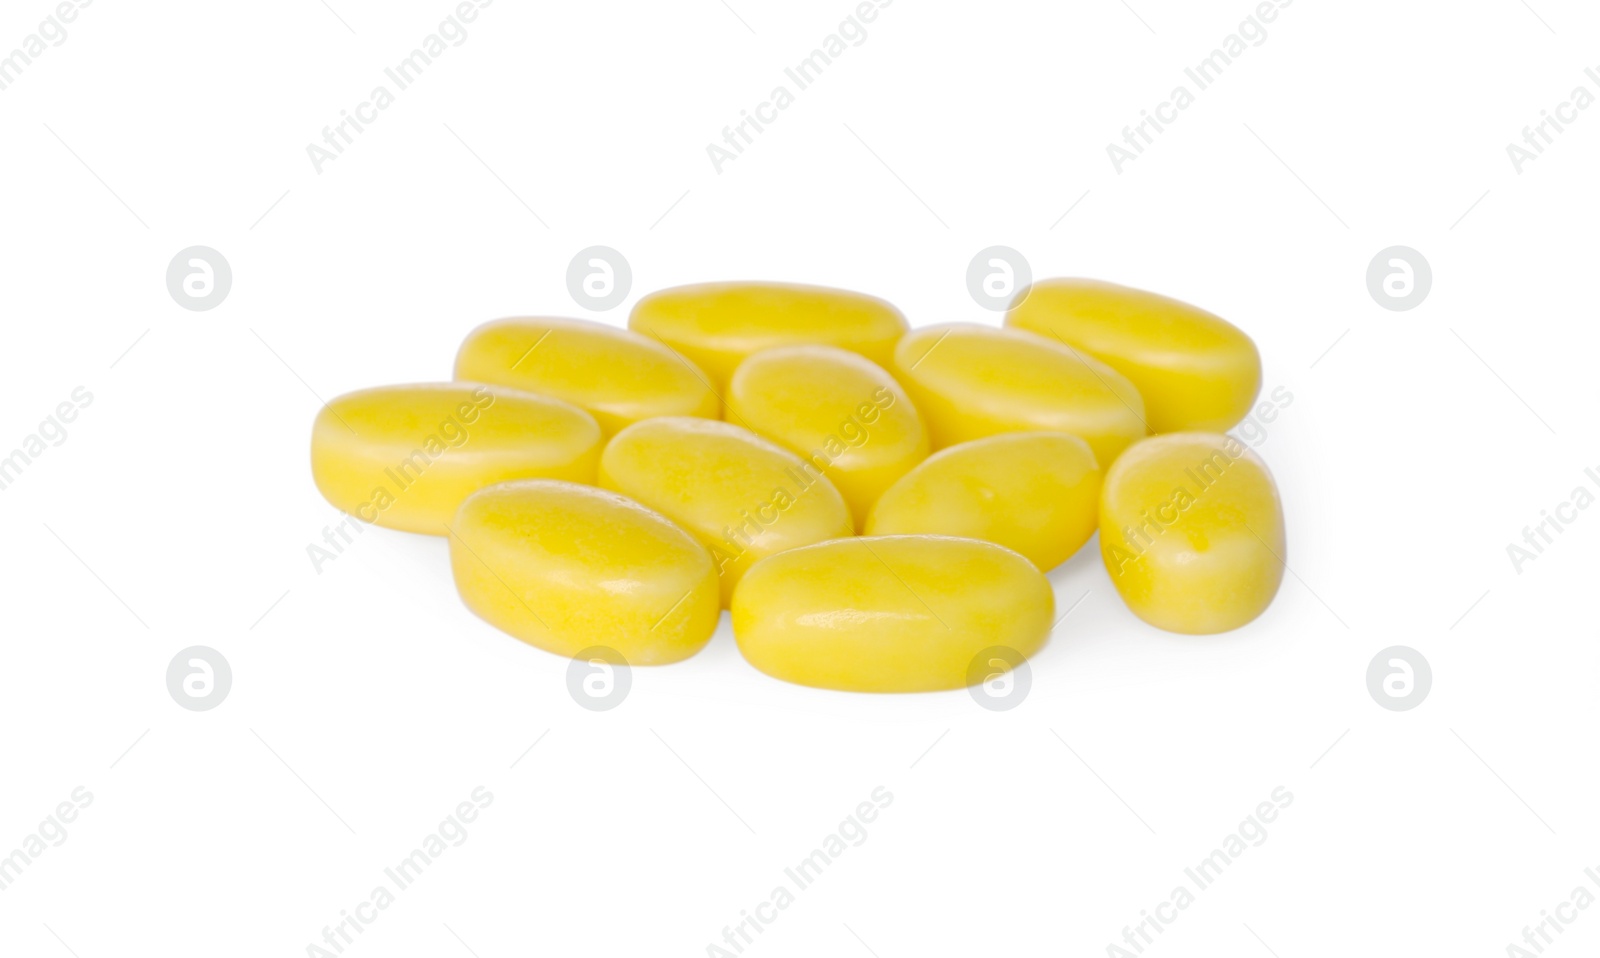 Photo of Tasty yellow dragee candies on white background